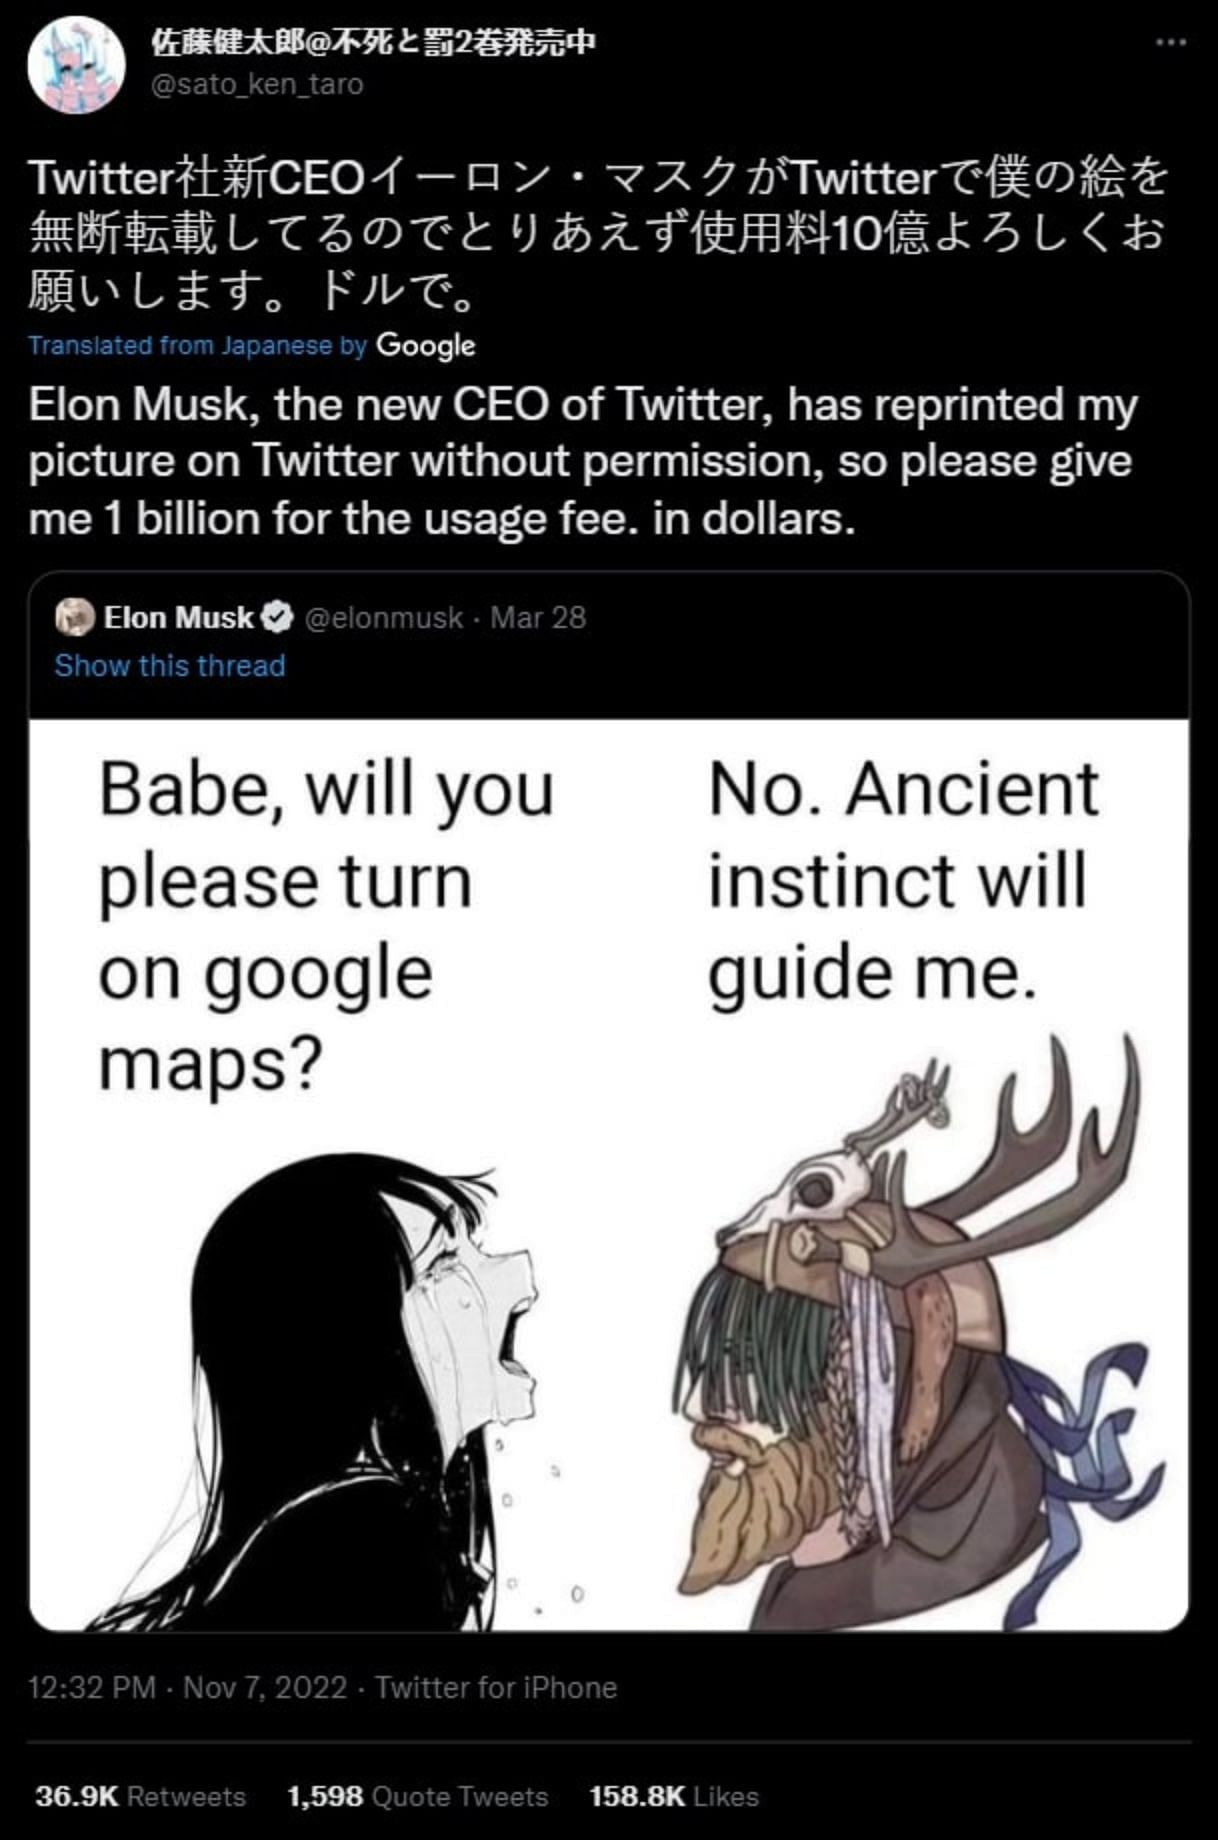 Manga Author Wants Elon Musk to Pay Up For Using Art Without